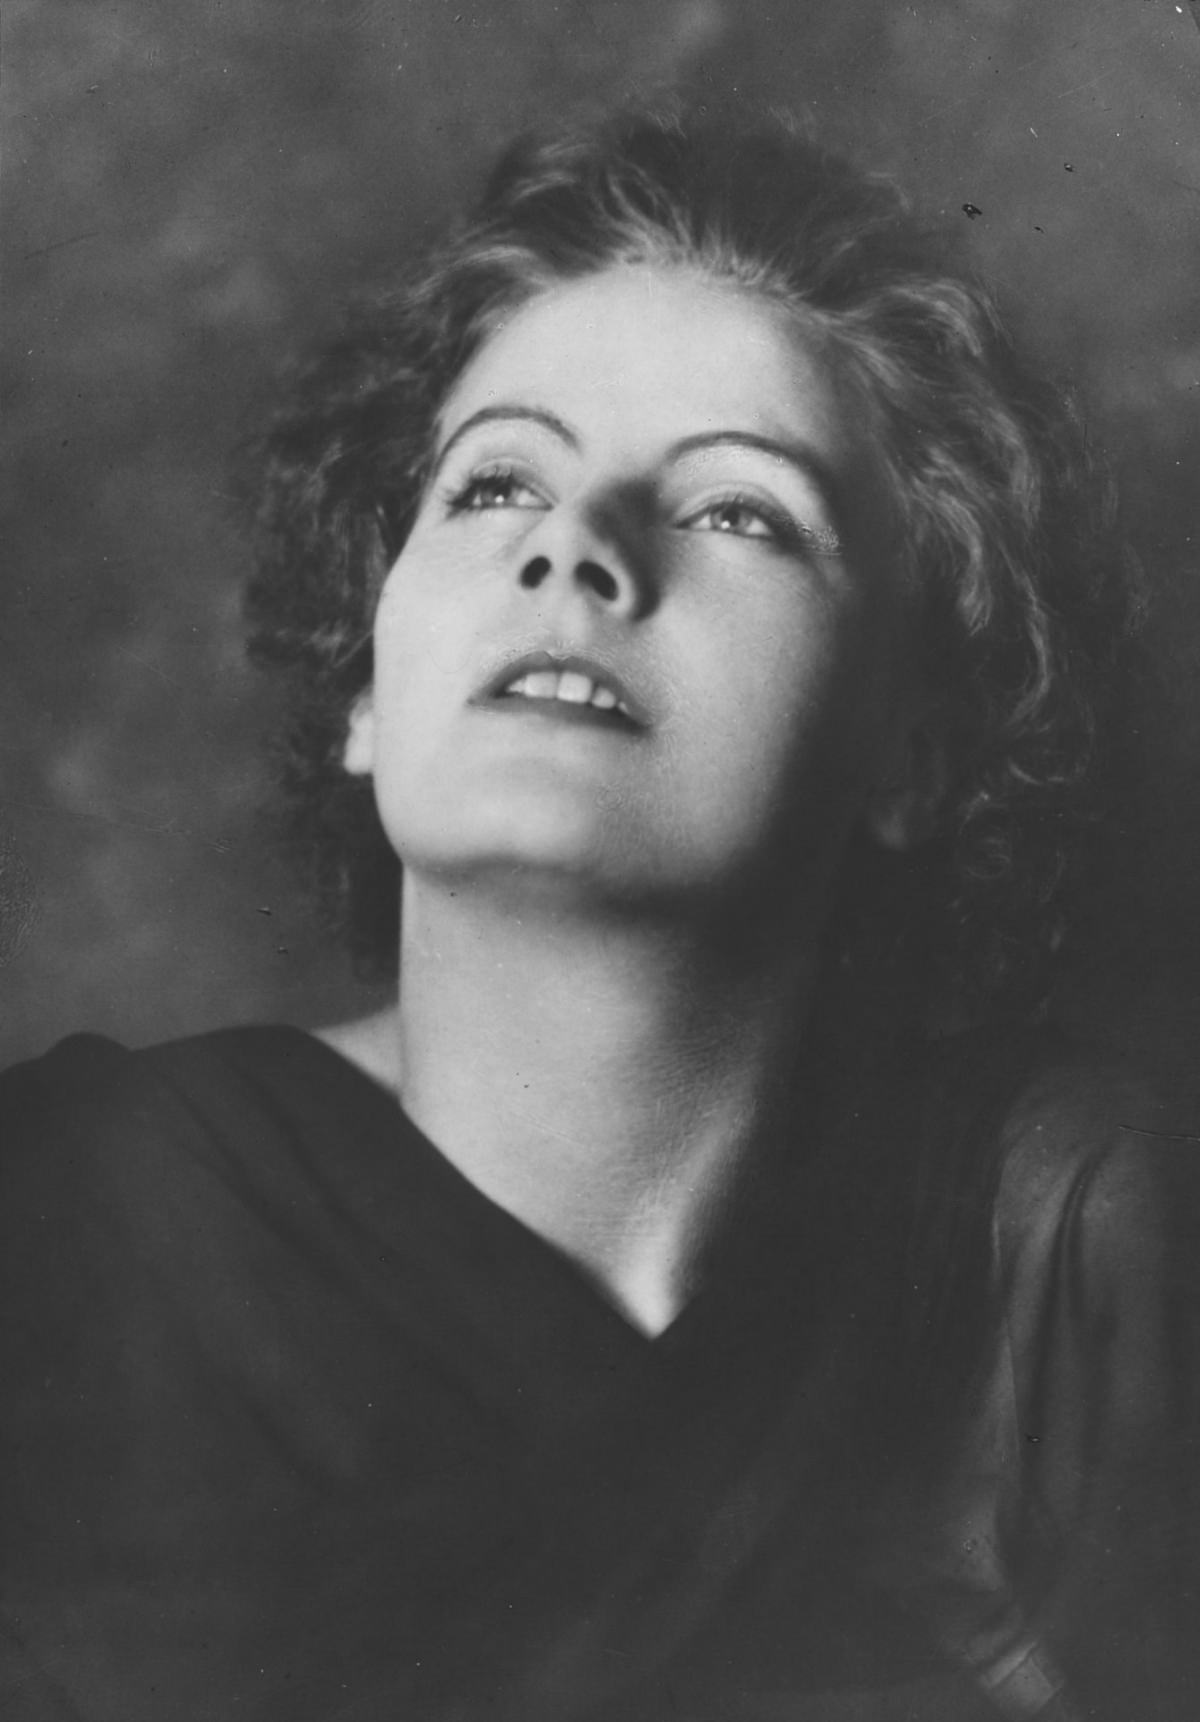 Arnold Genthe's Timeless Portraits of Greta Garbo, 1925: An Intimate Look at a Legend